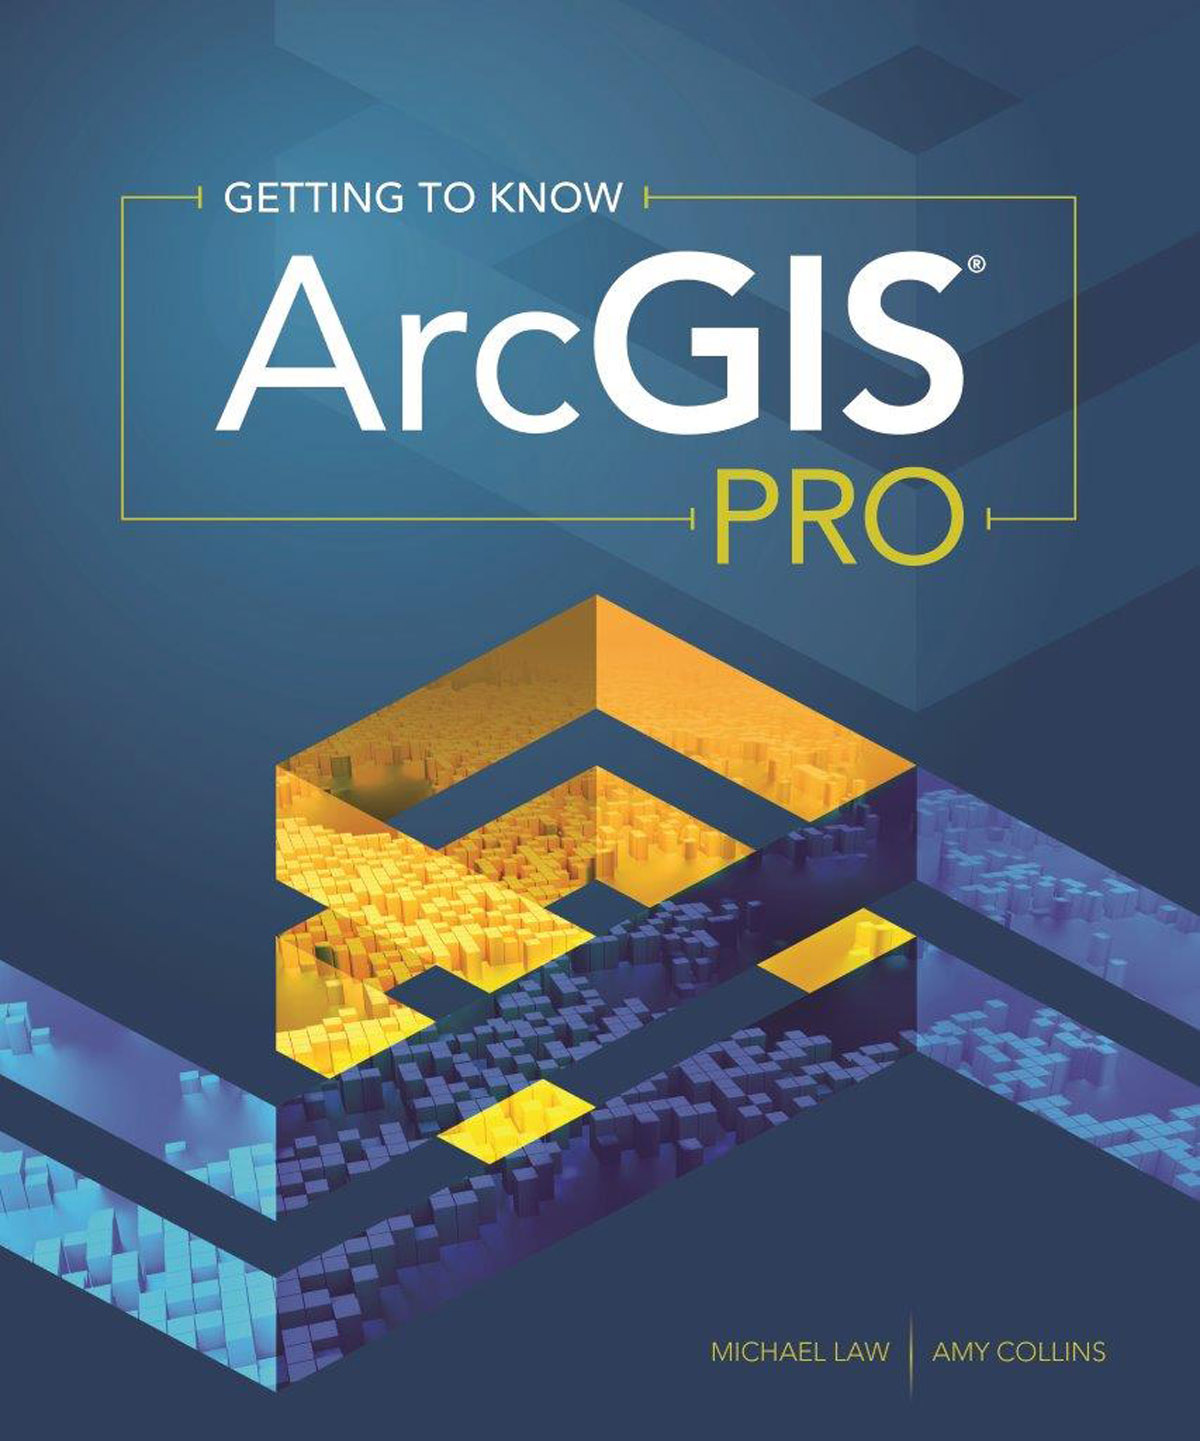 getting-to-know-arcgis-pro-lg.jpg